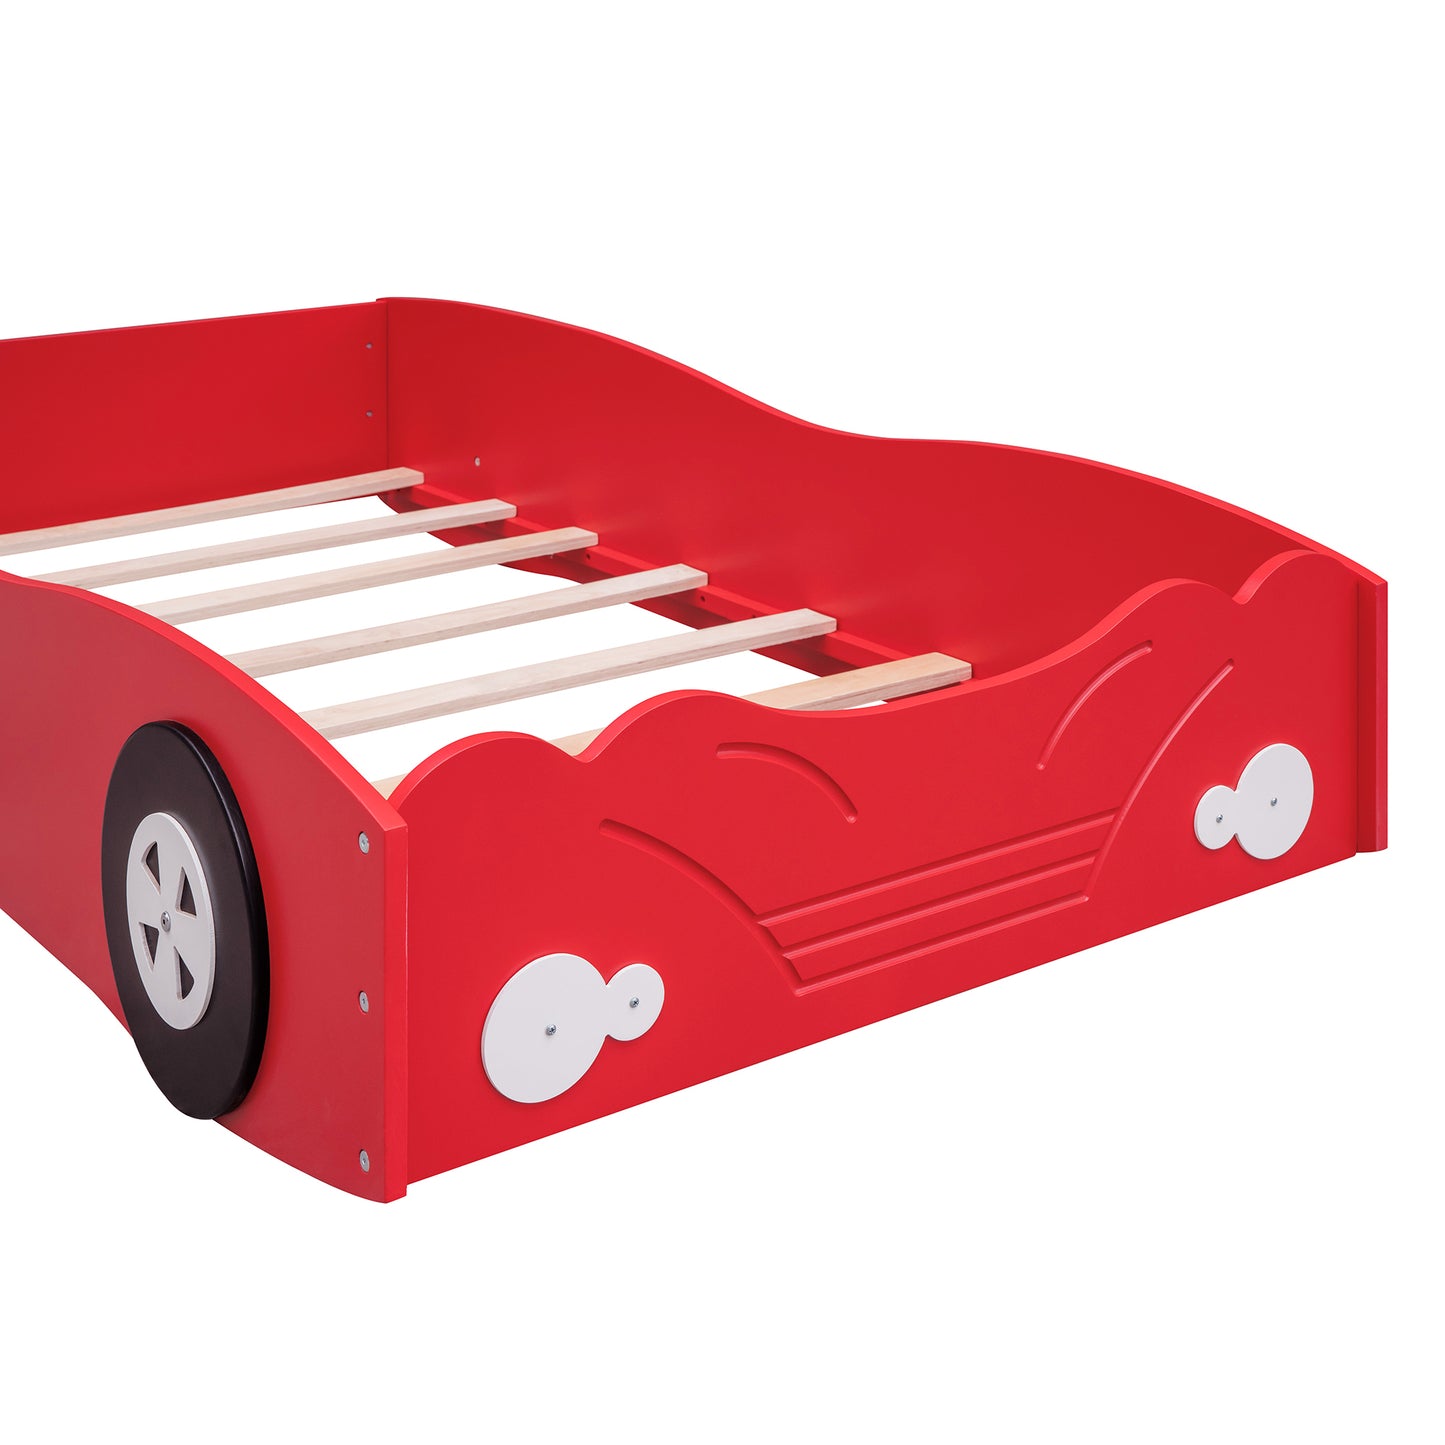 Twin Size Car-Shaped Platform Bed, Red